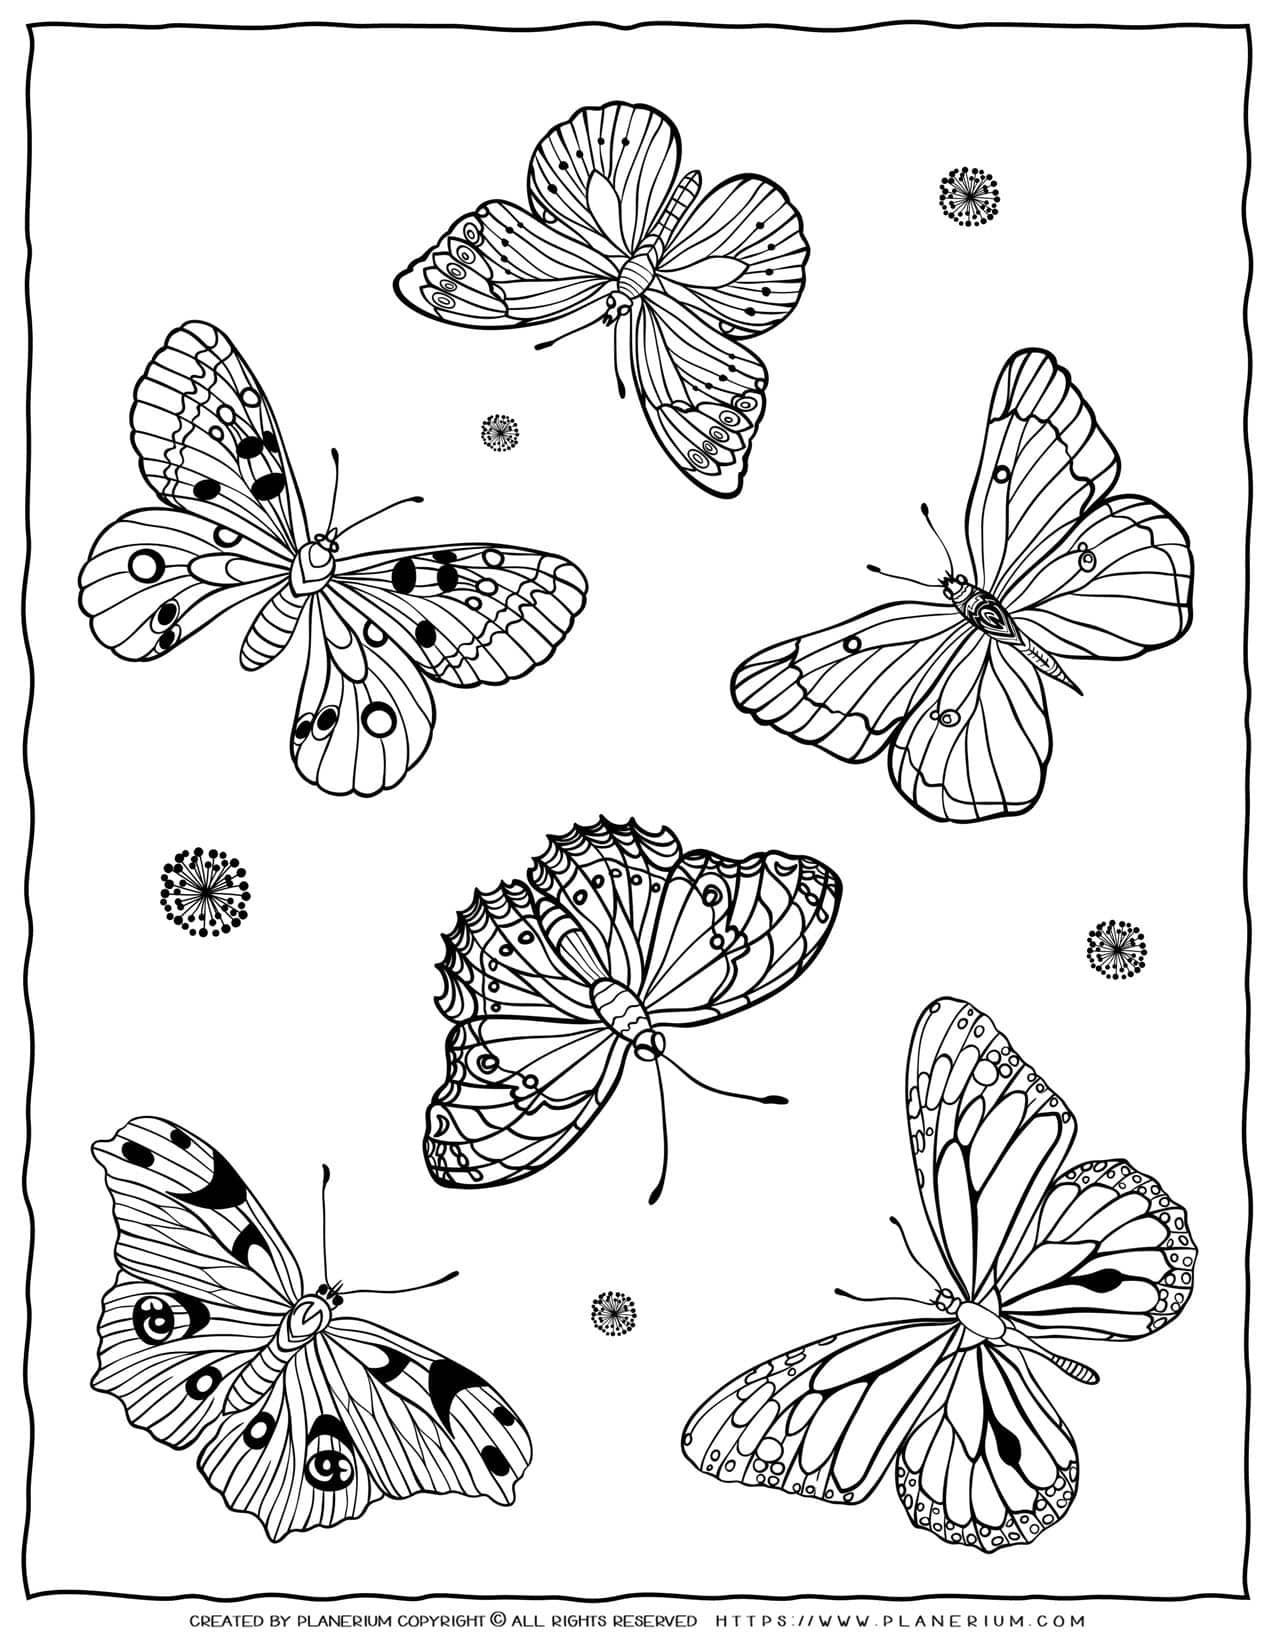 Finished Adult Coloring Pages Butterfly Coloring Pages